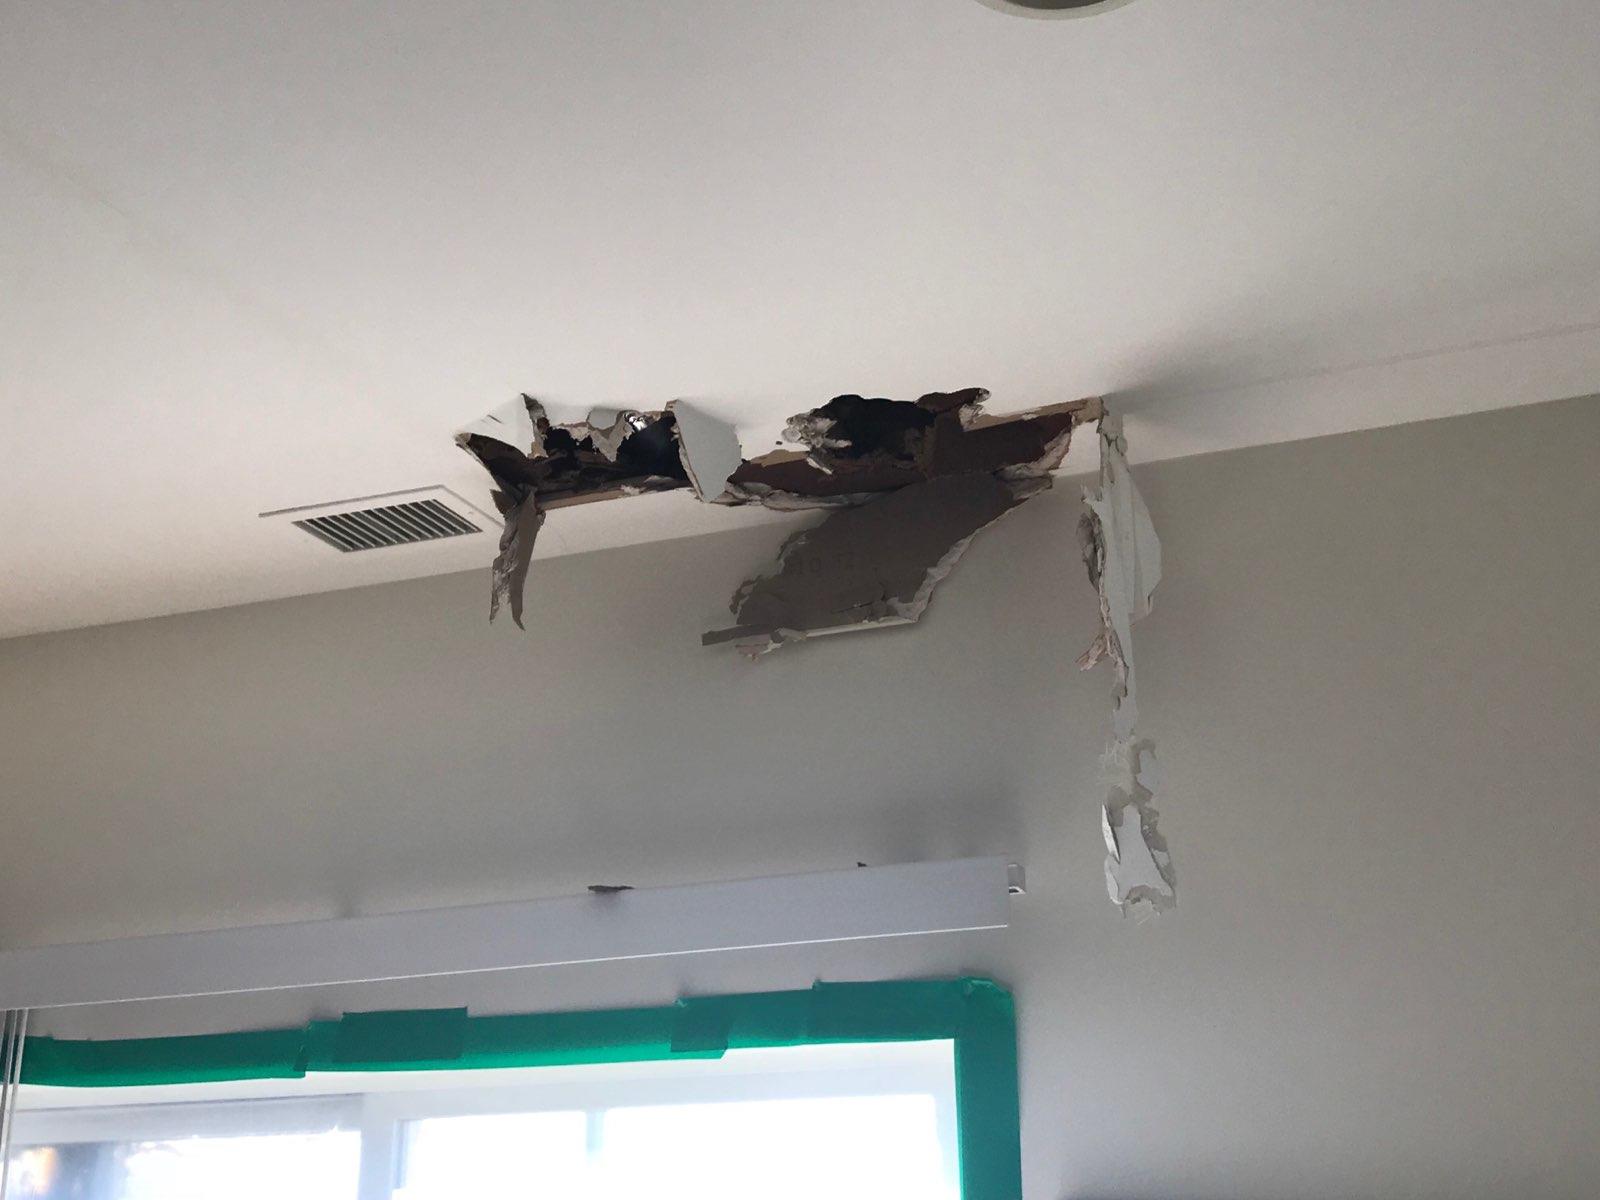 Ceiling damage due to a water loss! #SERVPRO